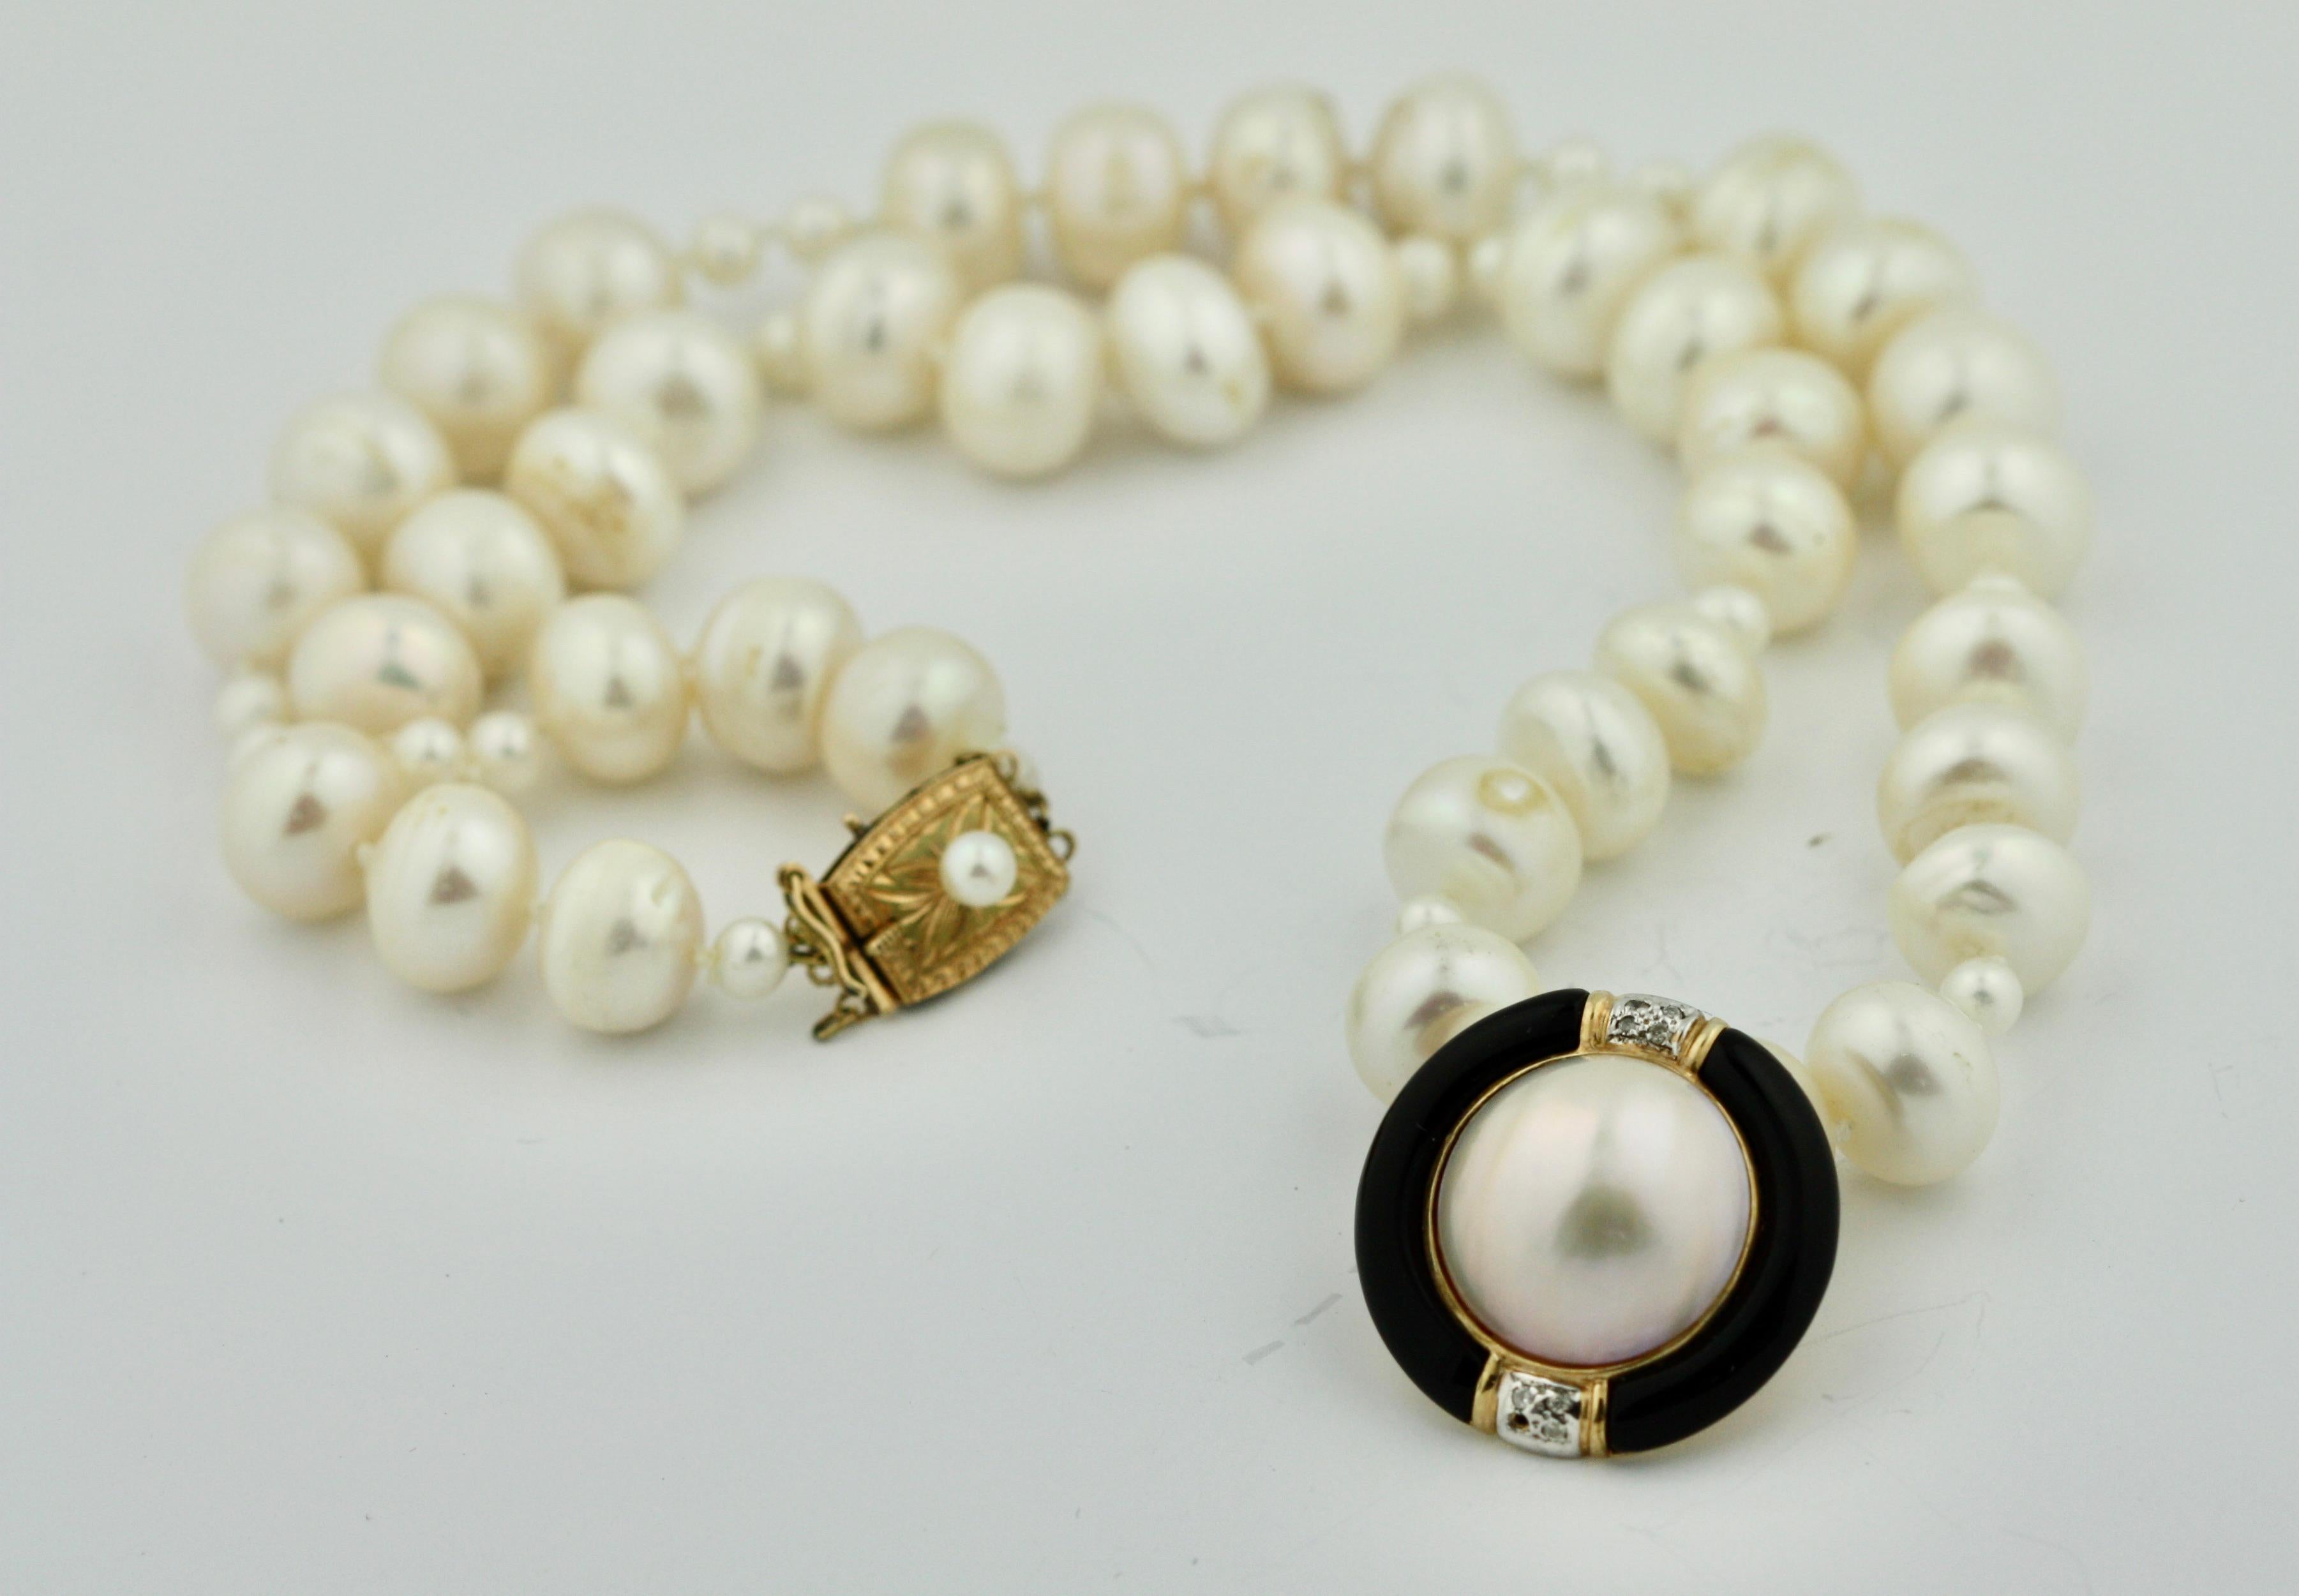 14 Karat Gold, Cultured Pearl, Mabé Pearl, Onyx and Diamond Necklace 
The single-strand composed of cultured pearls measuring approximately 4.2 to 10 mm., 
completed by a gold clasp set with a cultured pearl, length 18 inches.